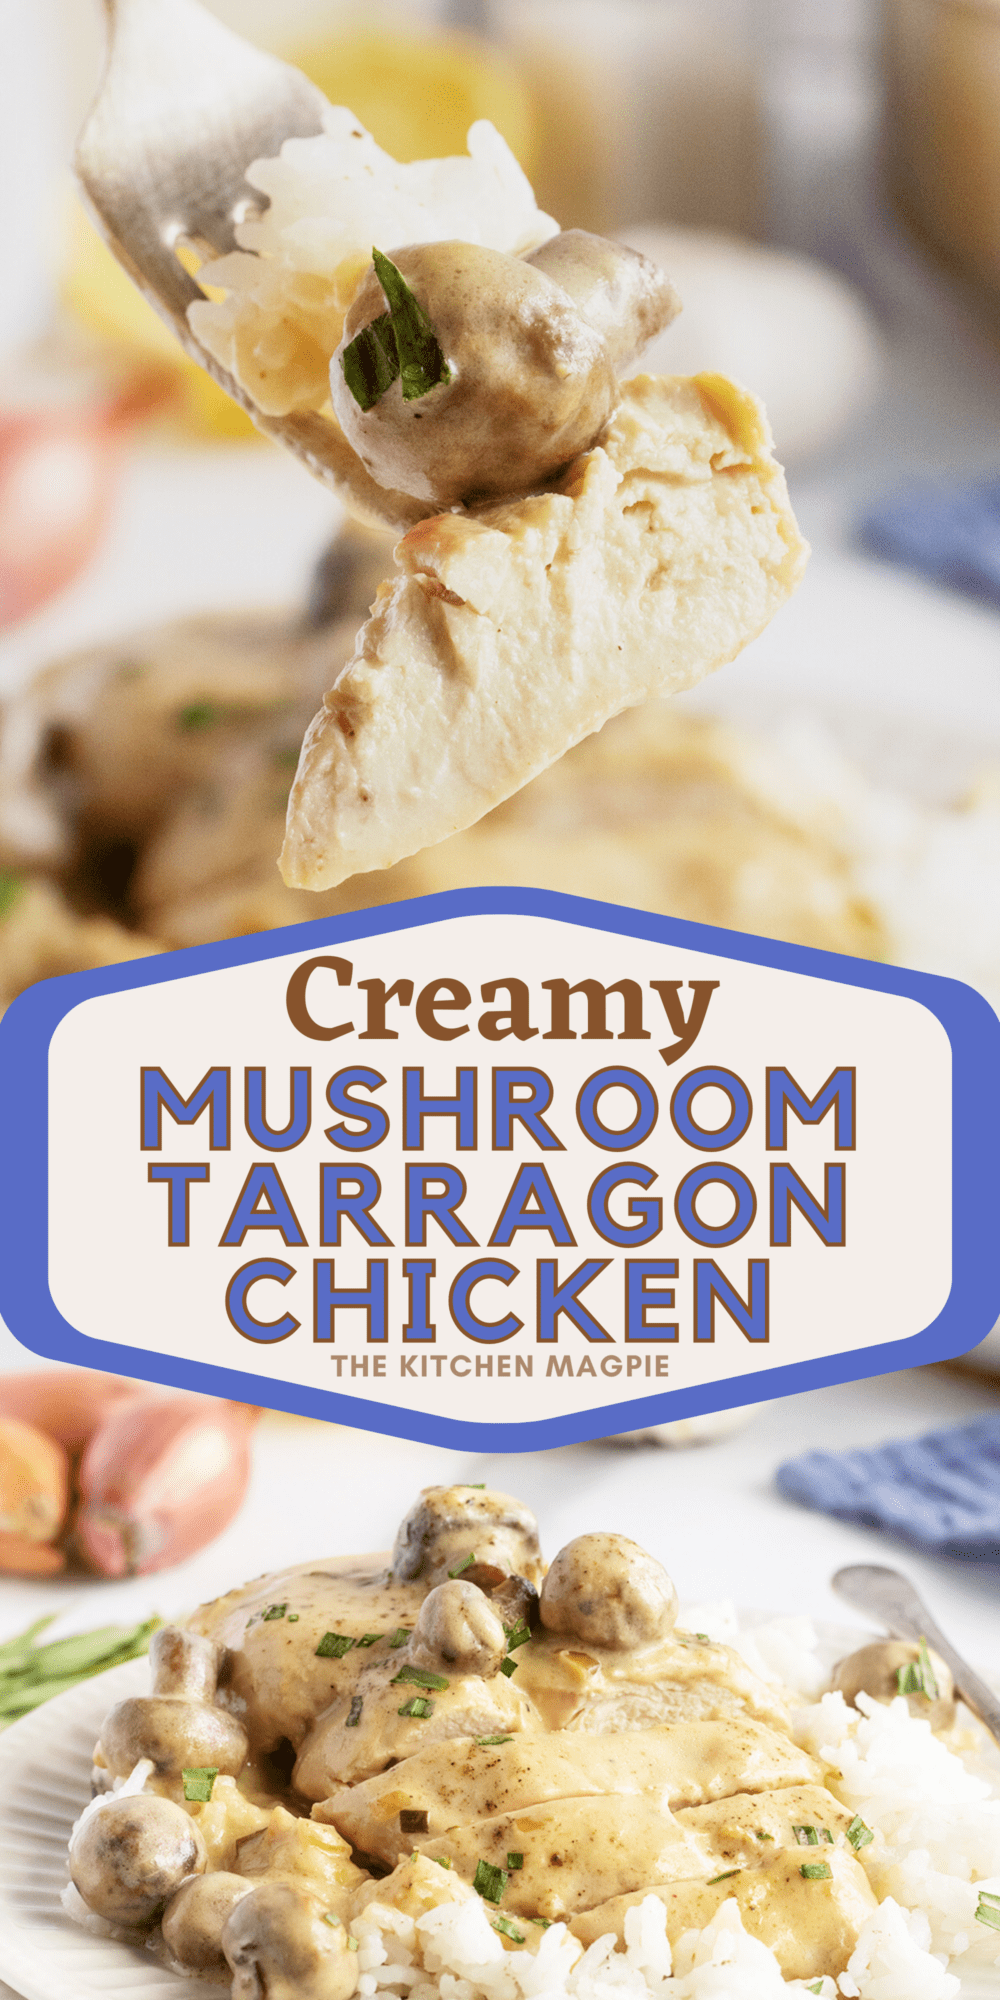 Delicious chicken breasts, simmered in a decadent white wine and mushroom tarragon sauce, are a great simple meal.